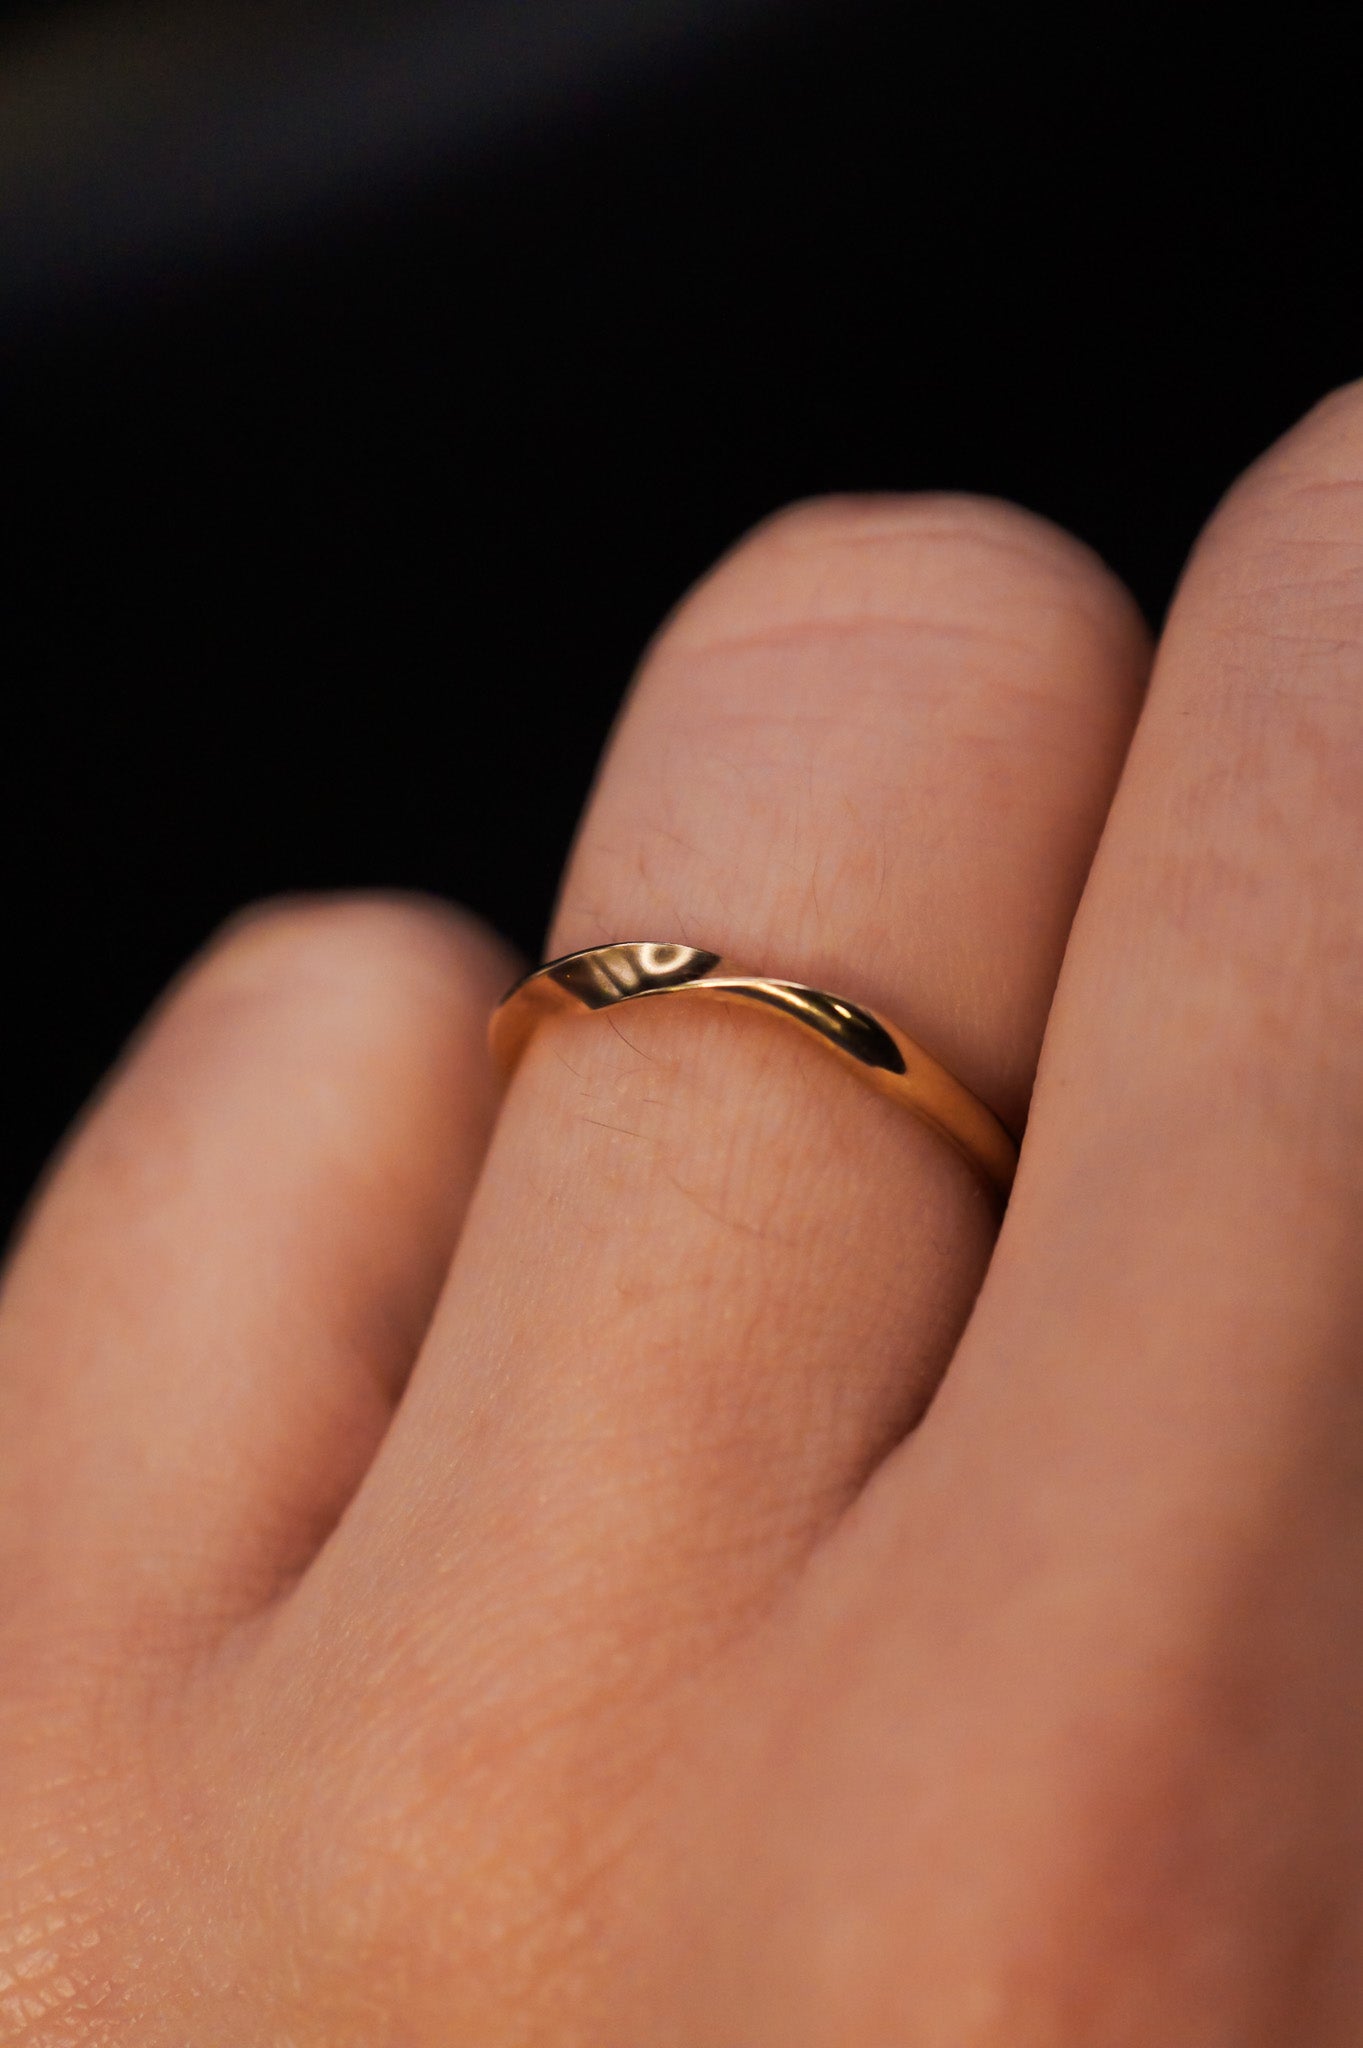 Möbius Band, 14K Gold Fill